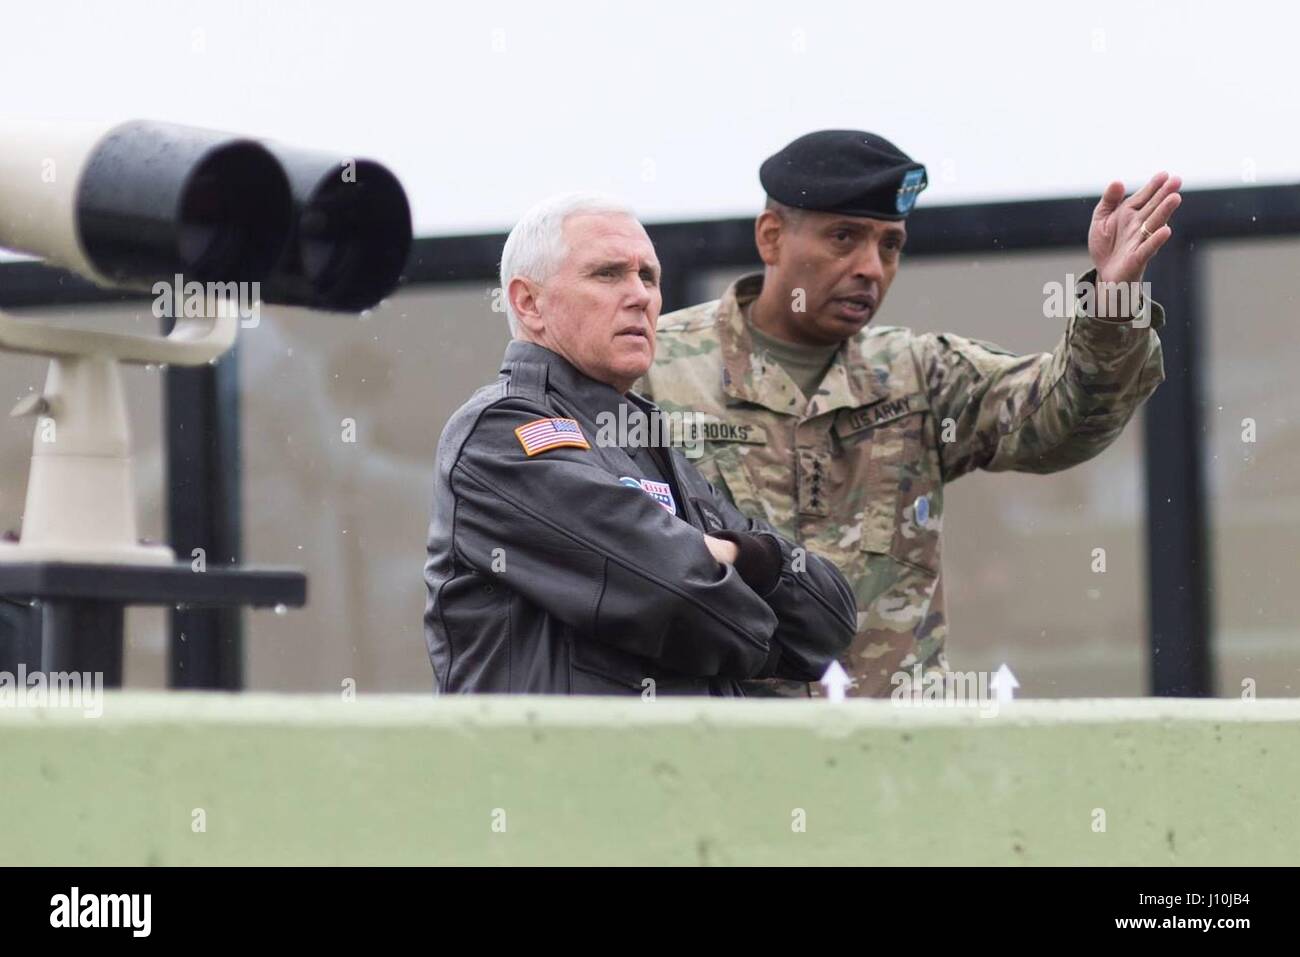 U.S. Vice President Mike Pence, left, looks out at the Demilitarized Zone with U.S. Army Gen. Vincent K. Brooks, commander of U.S and U.N. Forces in Korea at Freedom House during a visit to the DMZ April 17, 2017 in Panmunjom, South Korea. Stock Photo